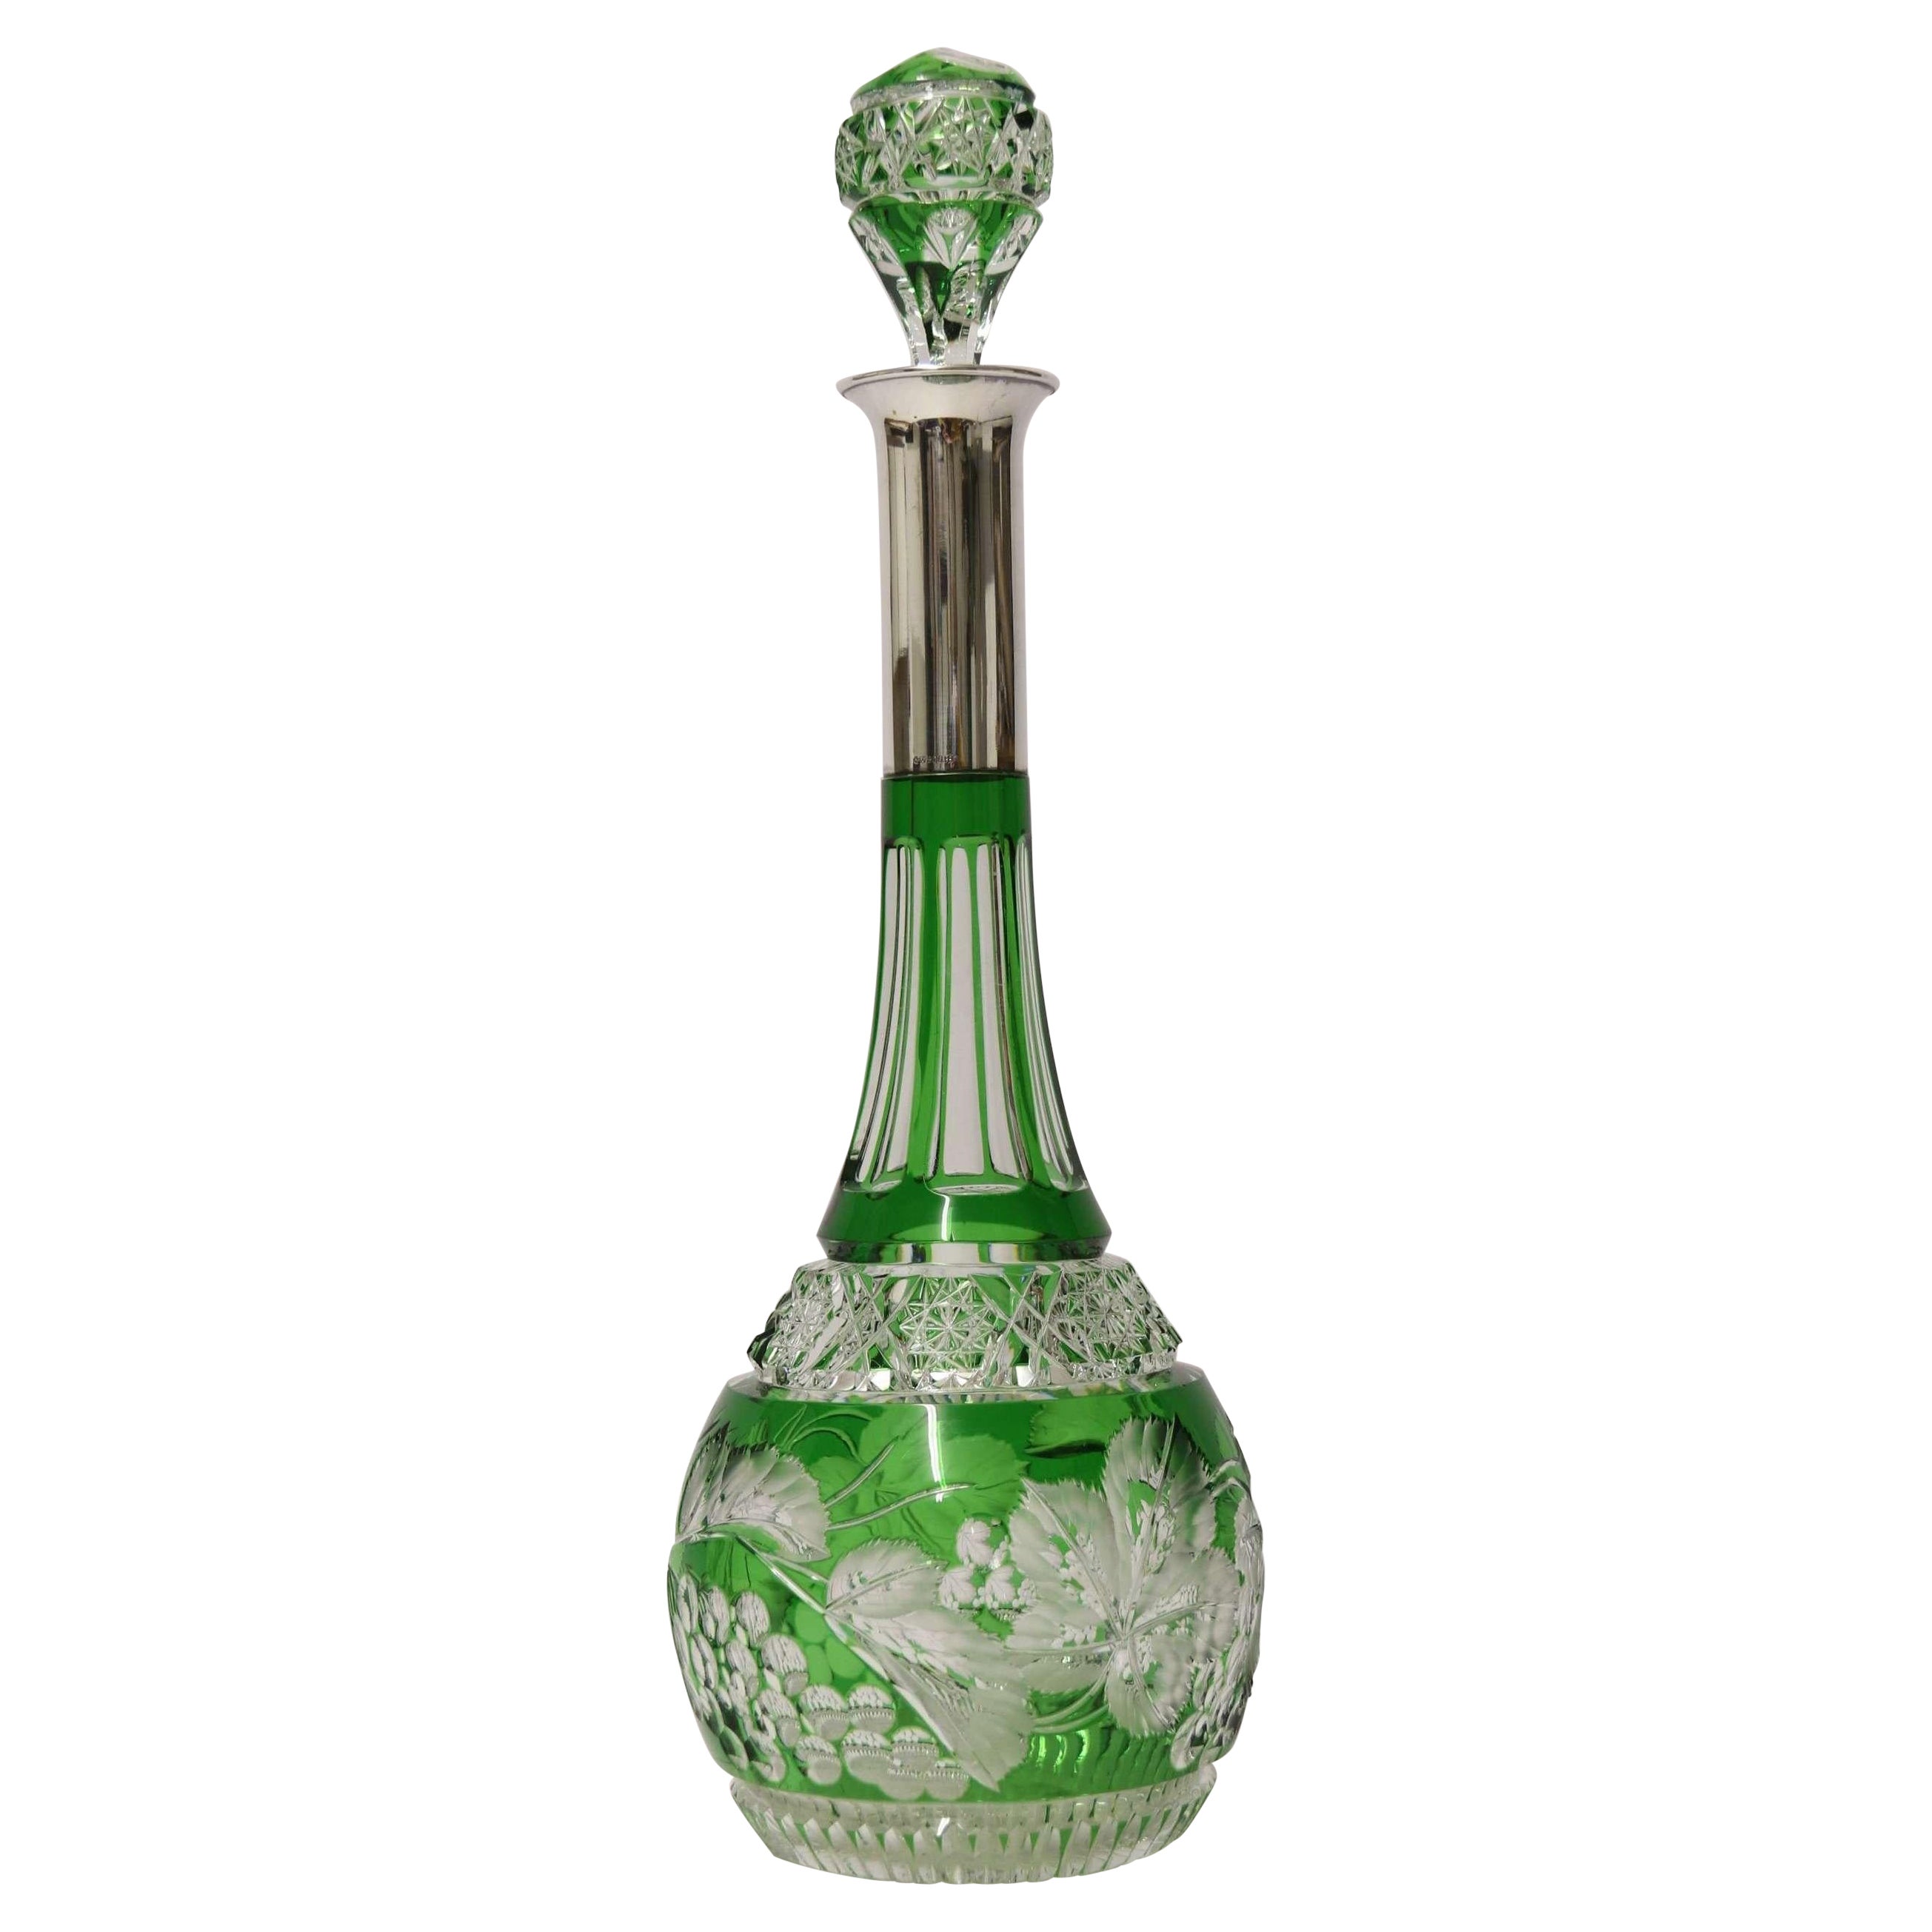 Bohemian Cut Glass and Silver Topped Spirit Decanter, Circa 1930